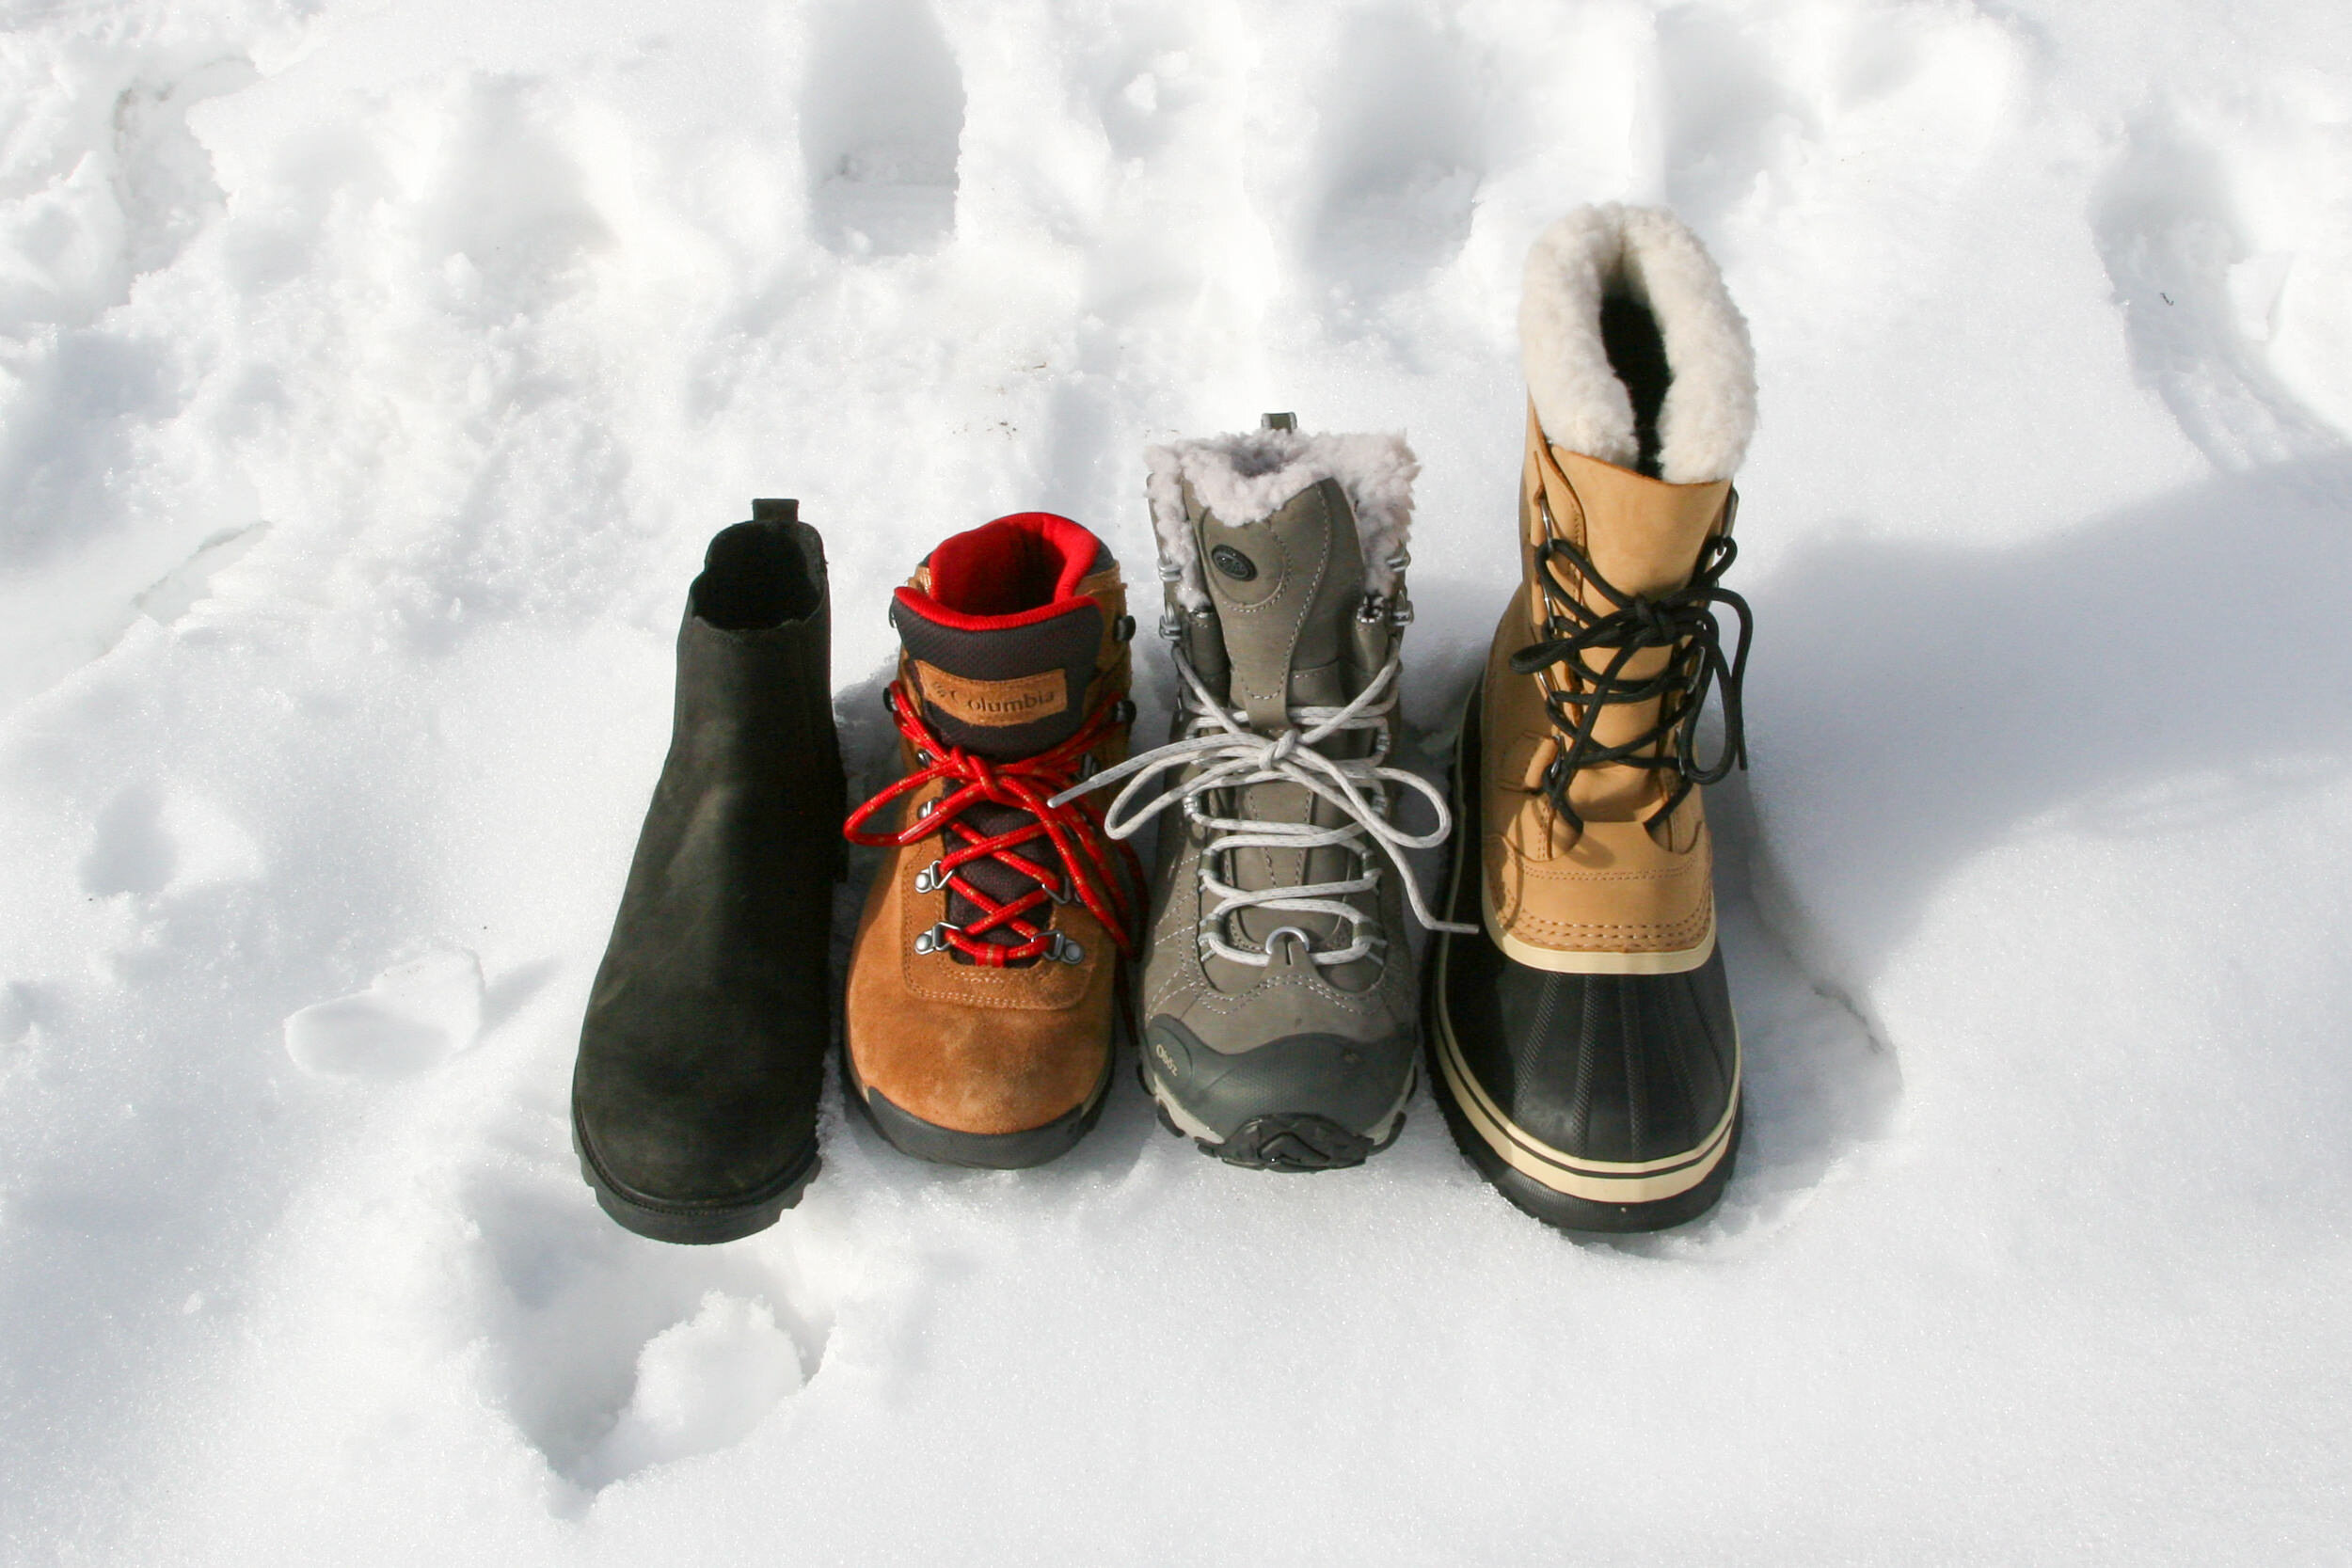 Least to most insulated from Left to Right - Sorel Ainsley Chelsea, Columbia Newton Ridge Plus Amped, Oboz Bridger 7” Bdry, Sorel Caribou